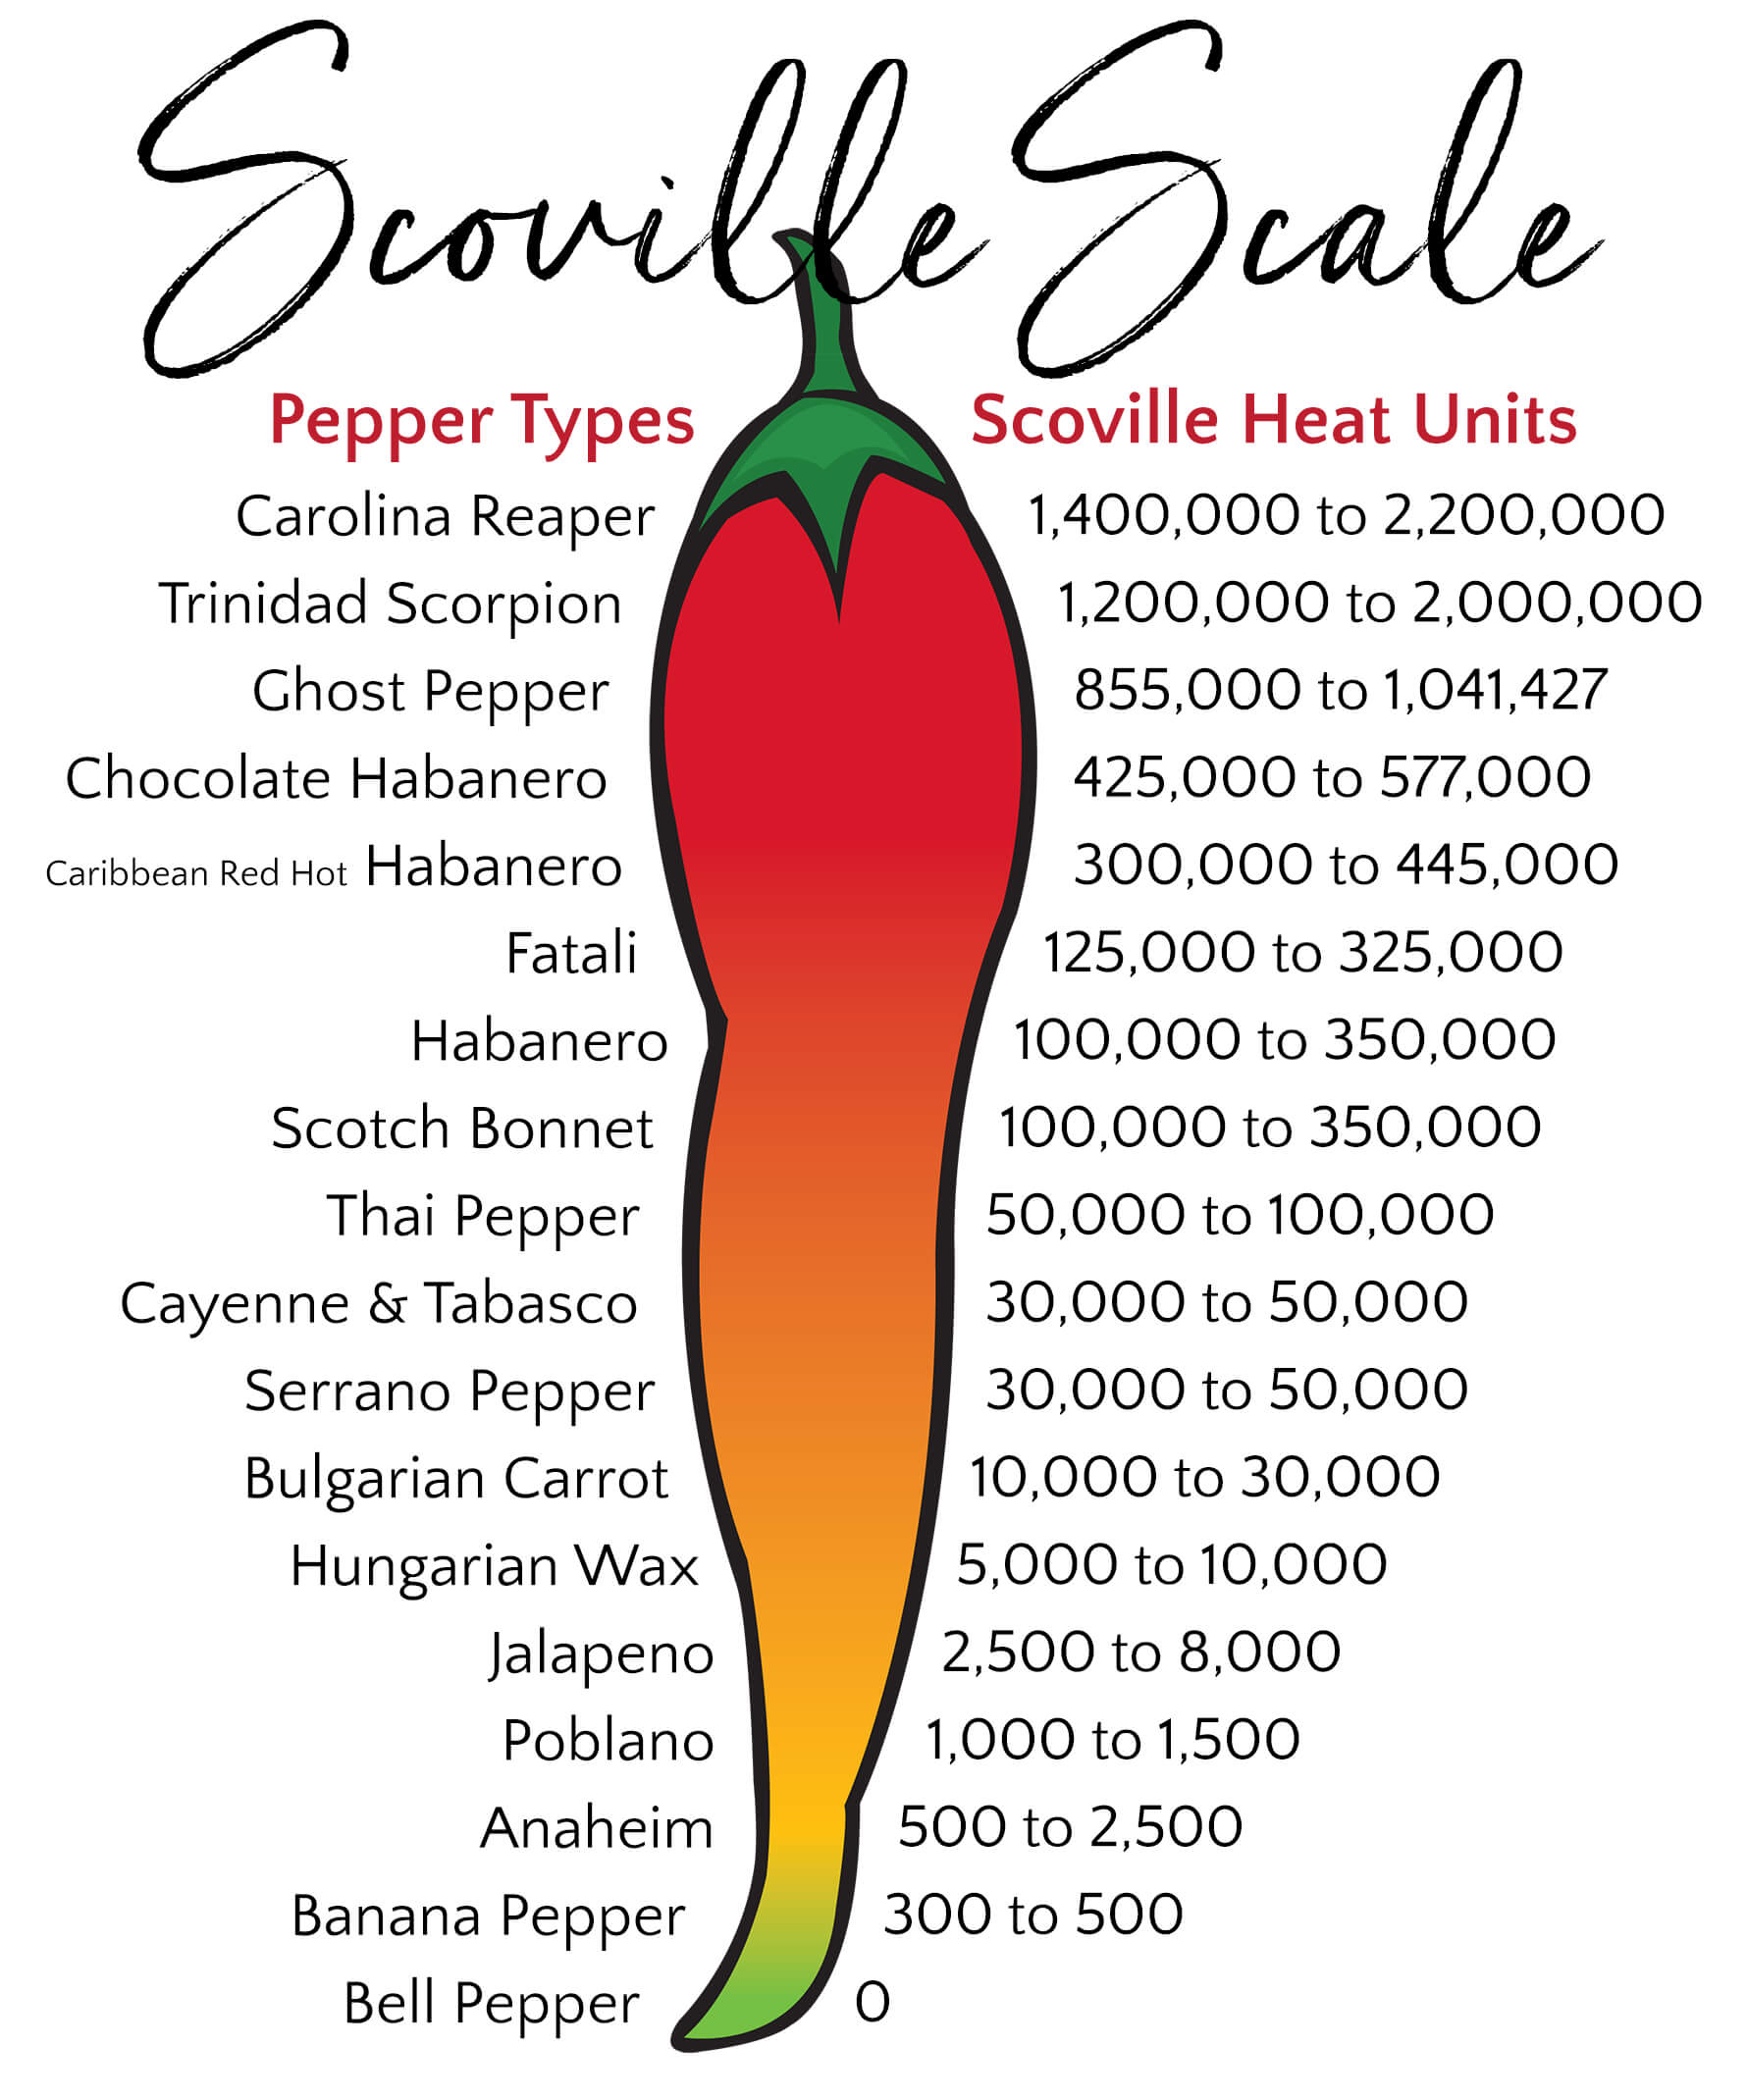 Scoville scale for peppers